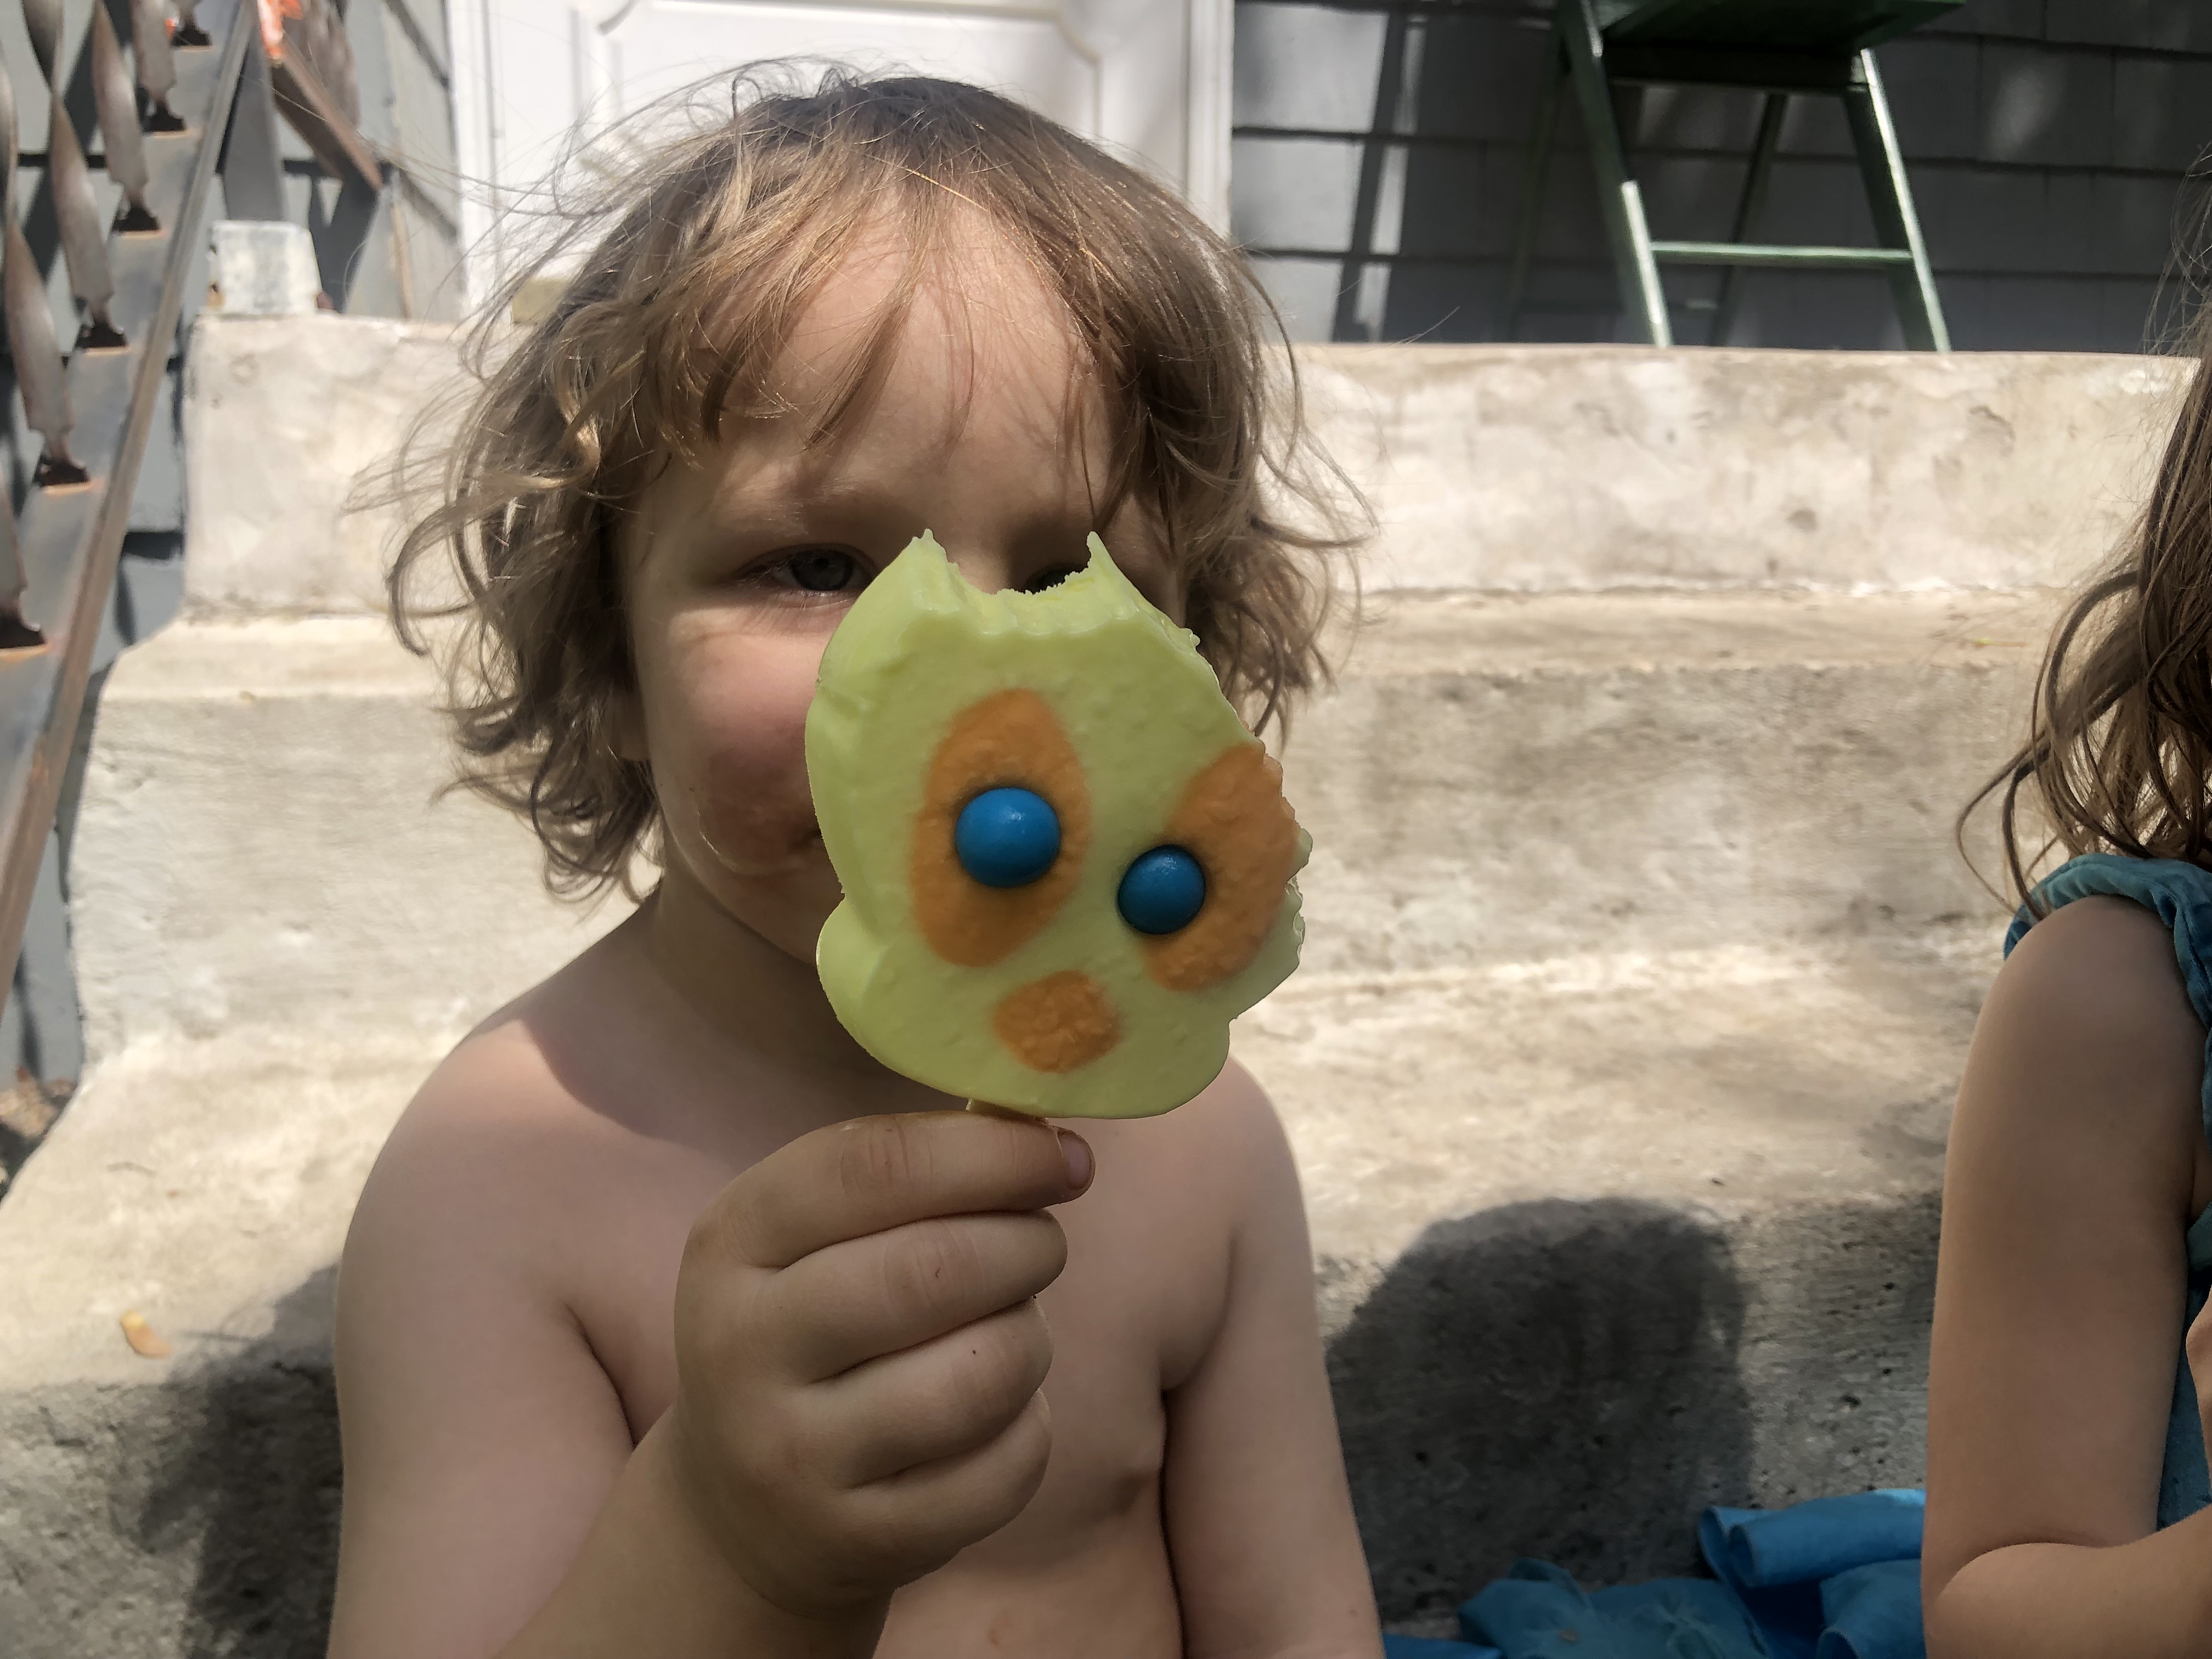 Toddler holding a partially eaten tweety bird popsicle in front of their face